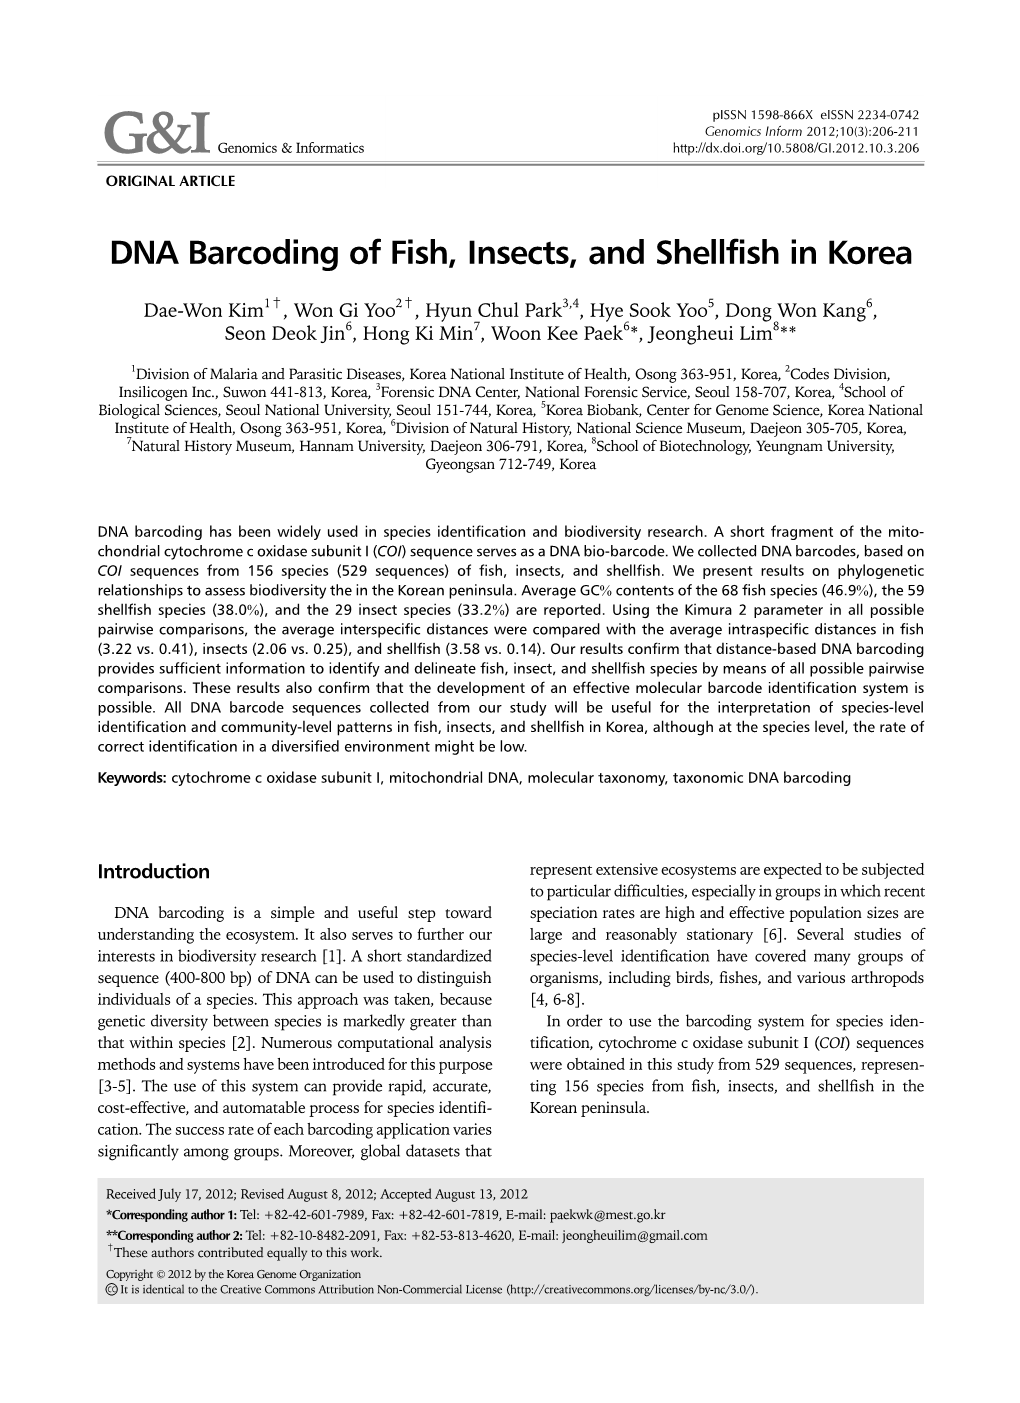 DNA Barcoding of Fish, Insects, and Shellfish in Korea